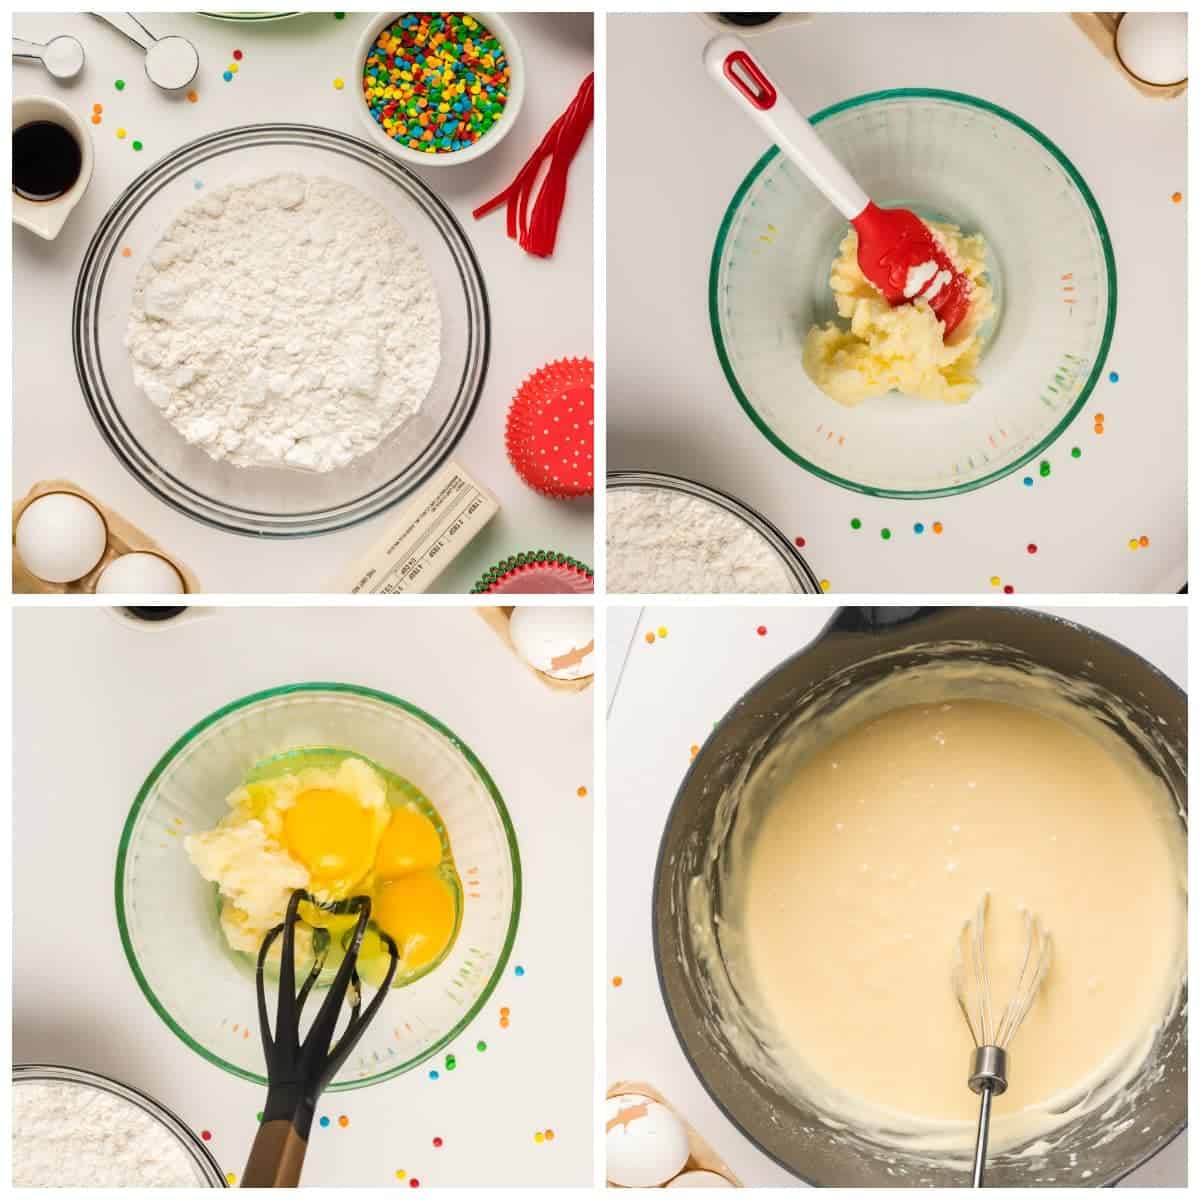 Four process photos. First one, dry ingredients in a bowl with sprinkles and some wet ingredients on the side. Second one, butter softened in a bowl with a red spatula. Third one, eggs and sugar added in to the butter. Fourth one, everything blended together in a large bowl. 